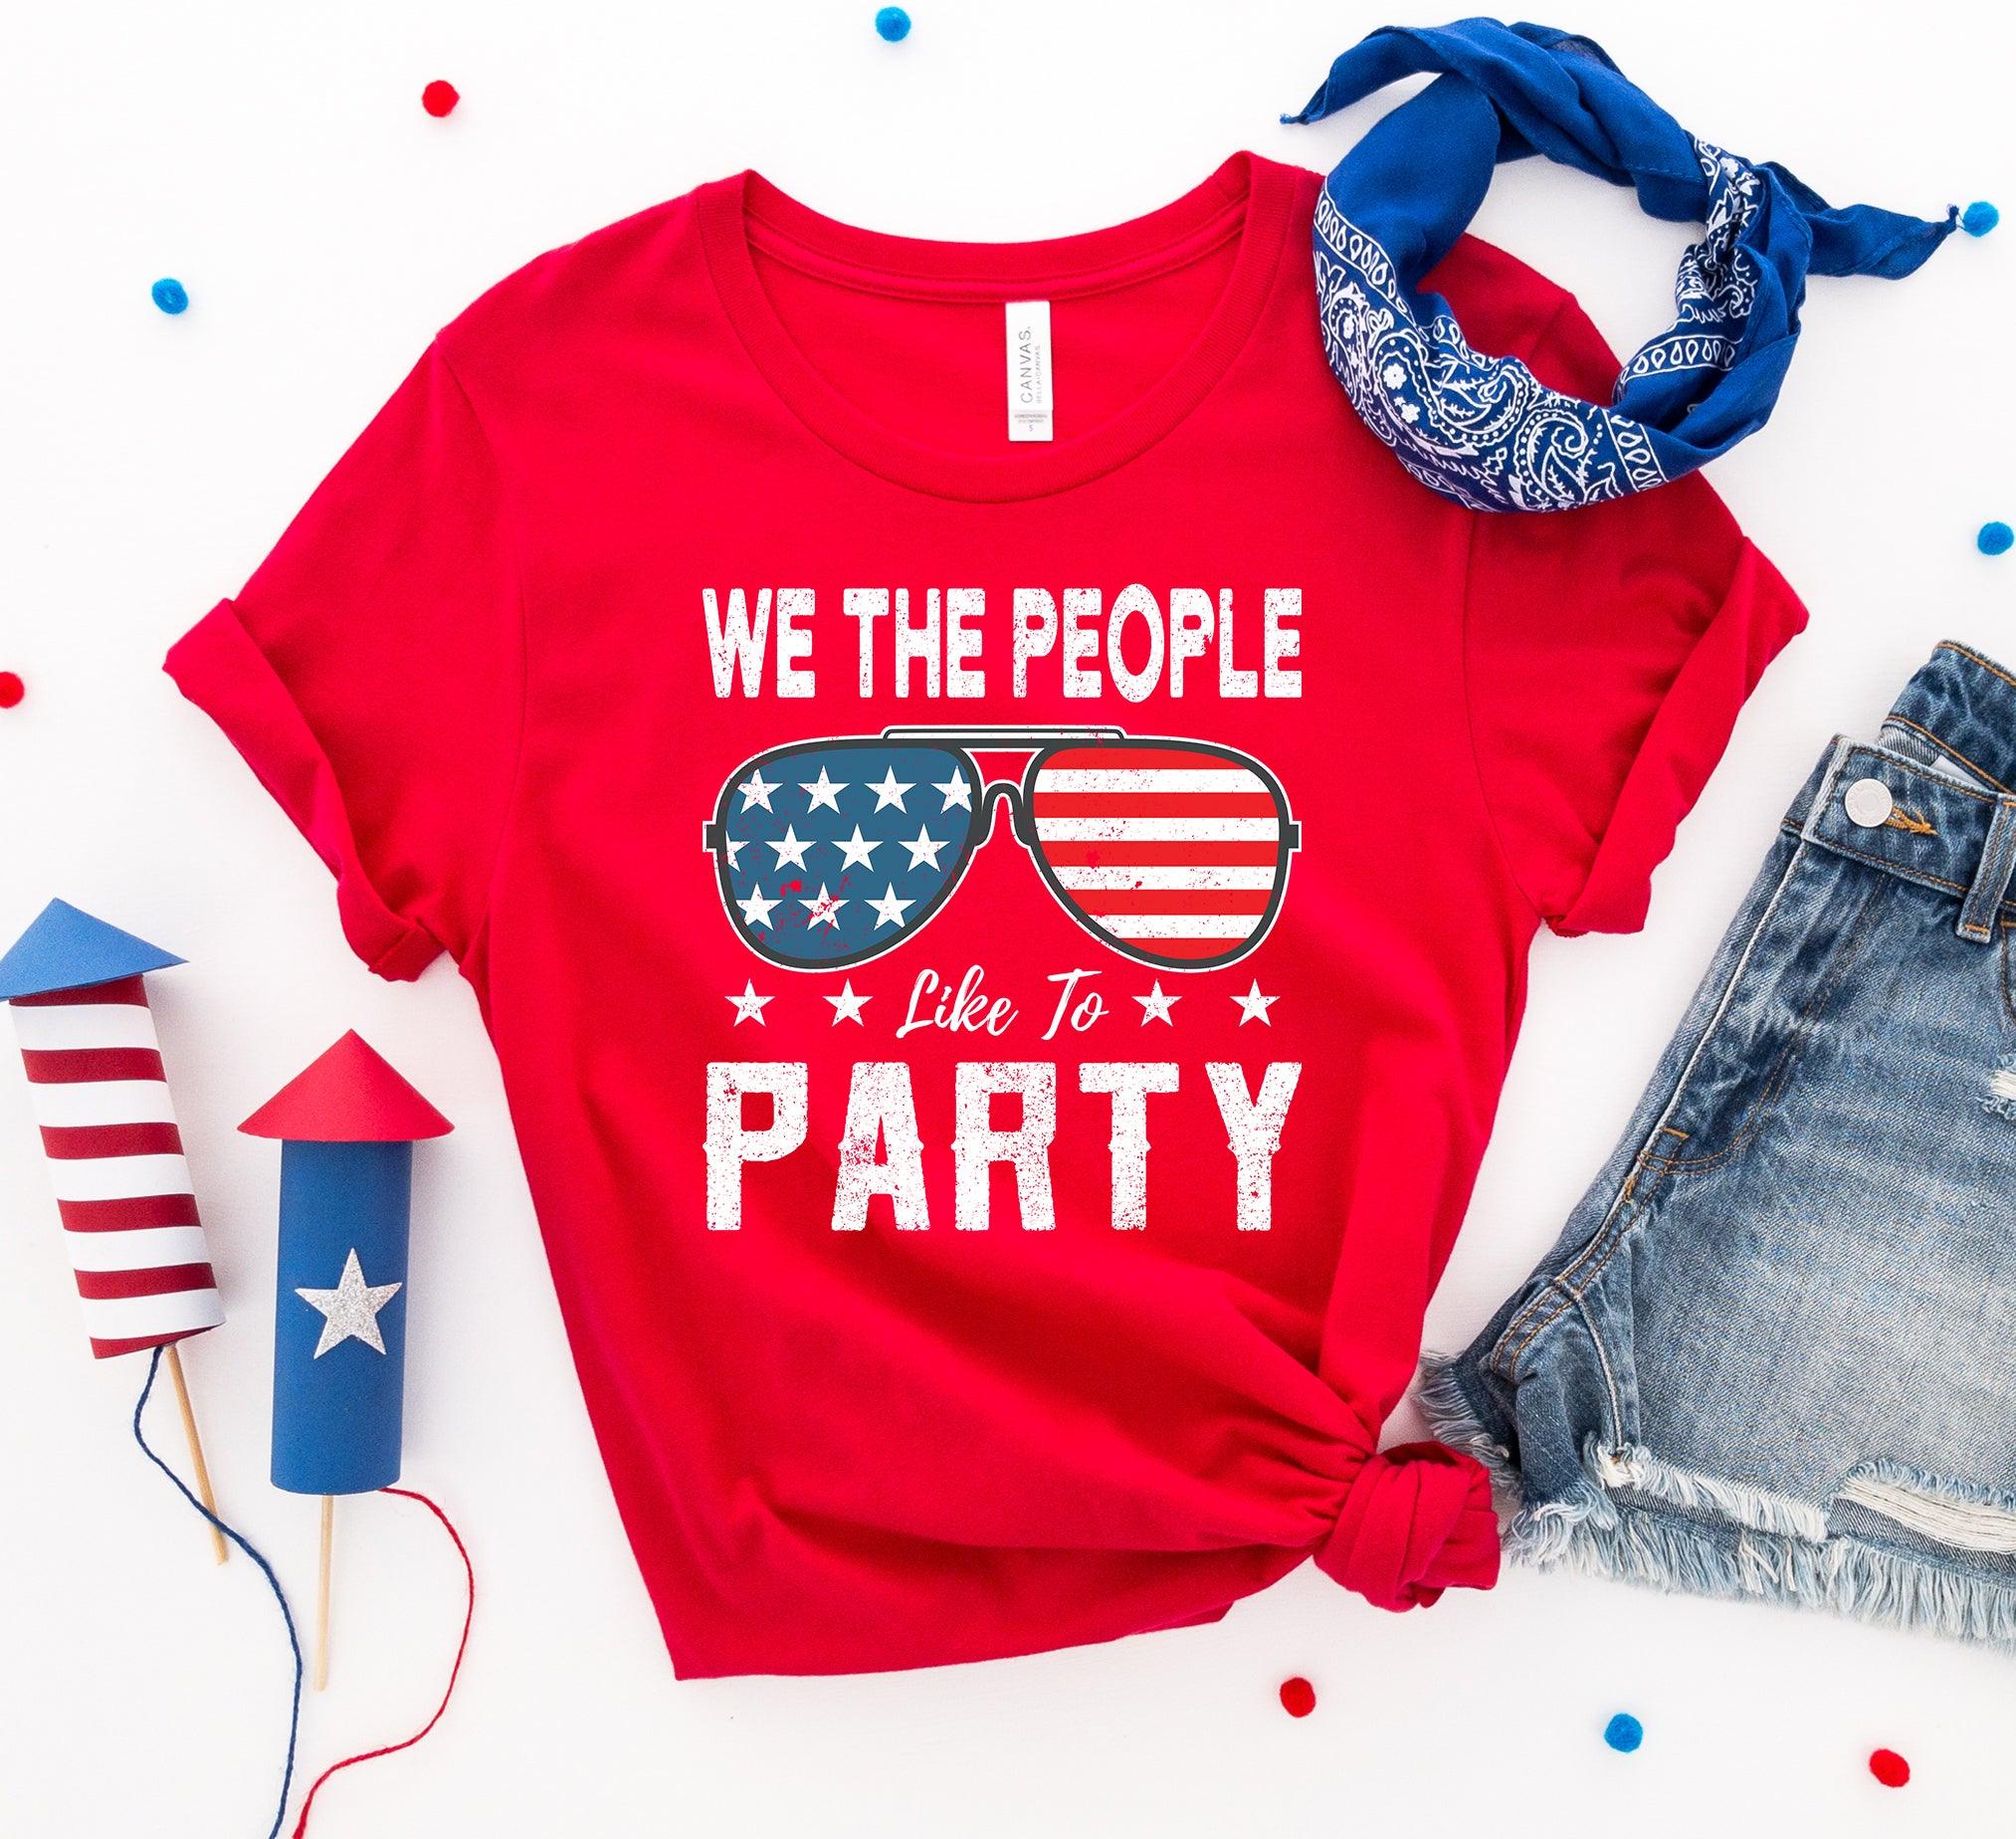 We the people like to party T-shirt - VirtuousWares:Global